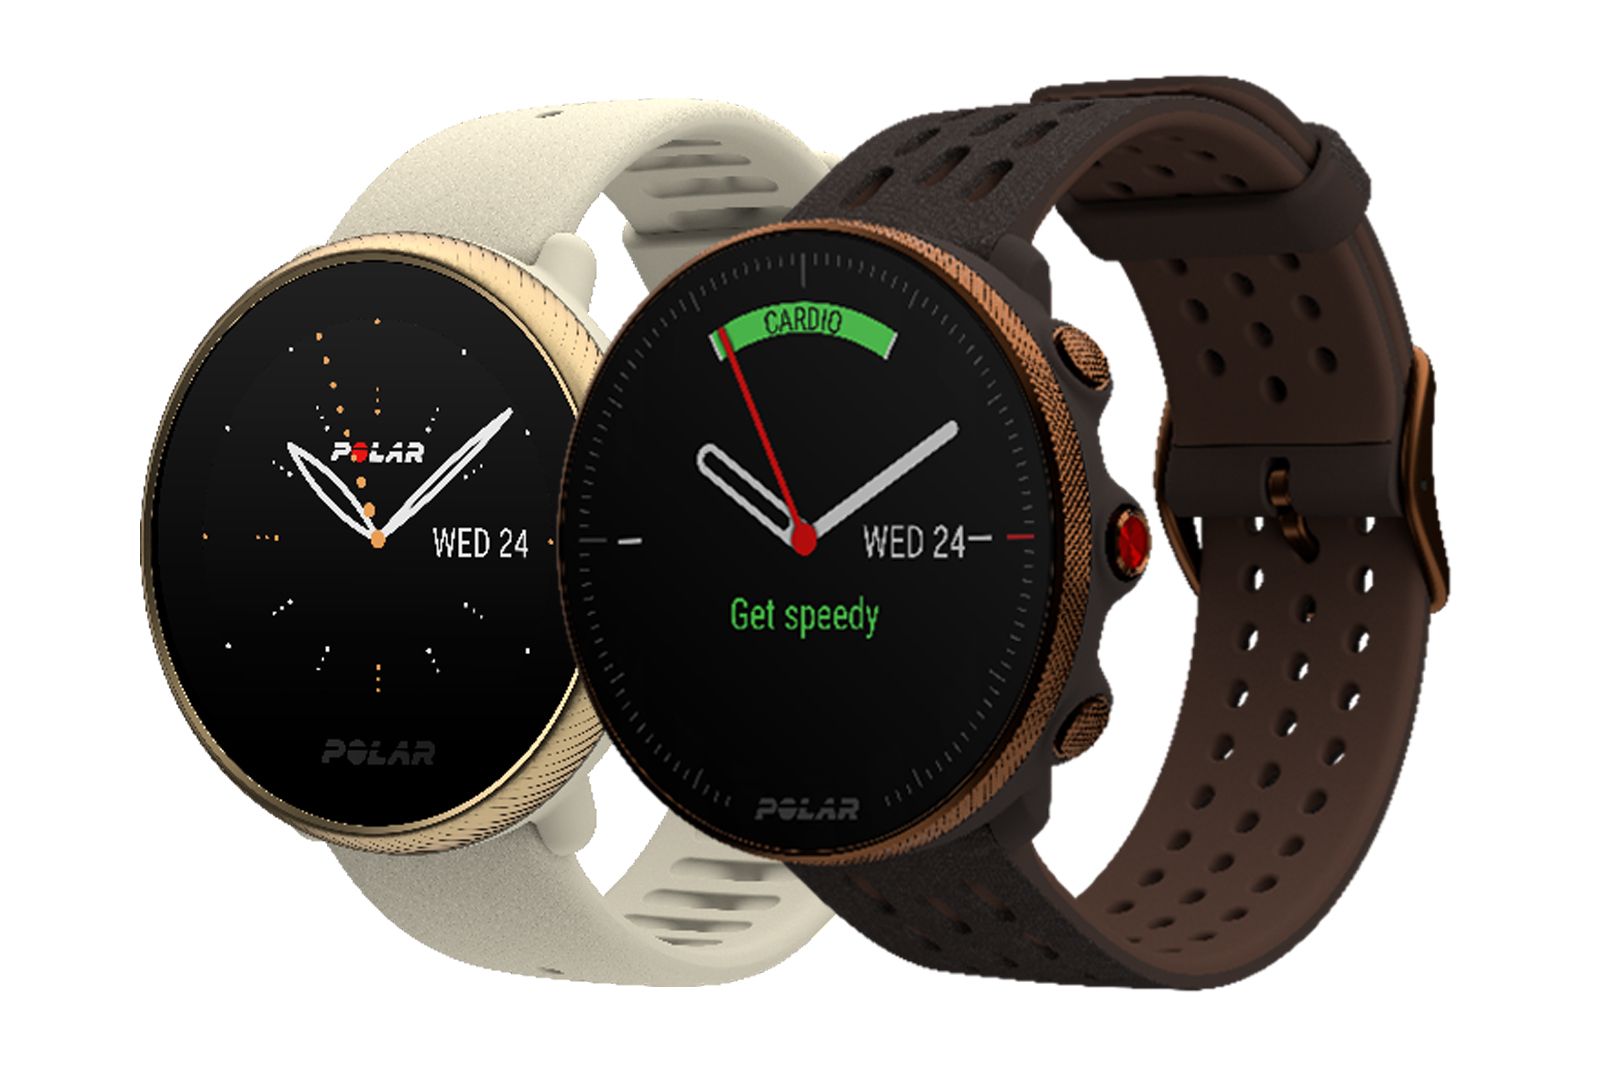 Polar updates Ignite and Vantage sports watches with exciting new features photo 1